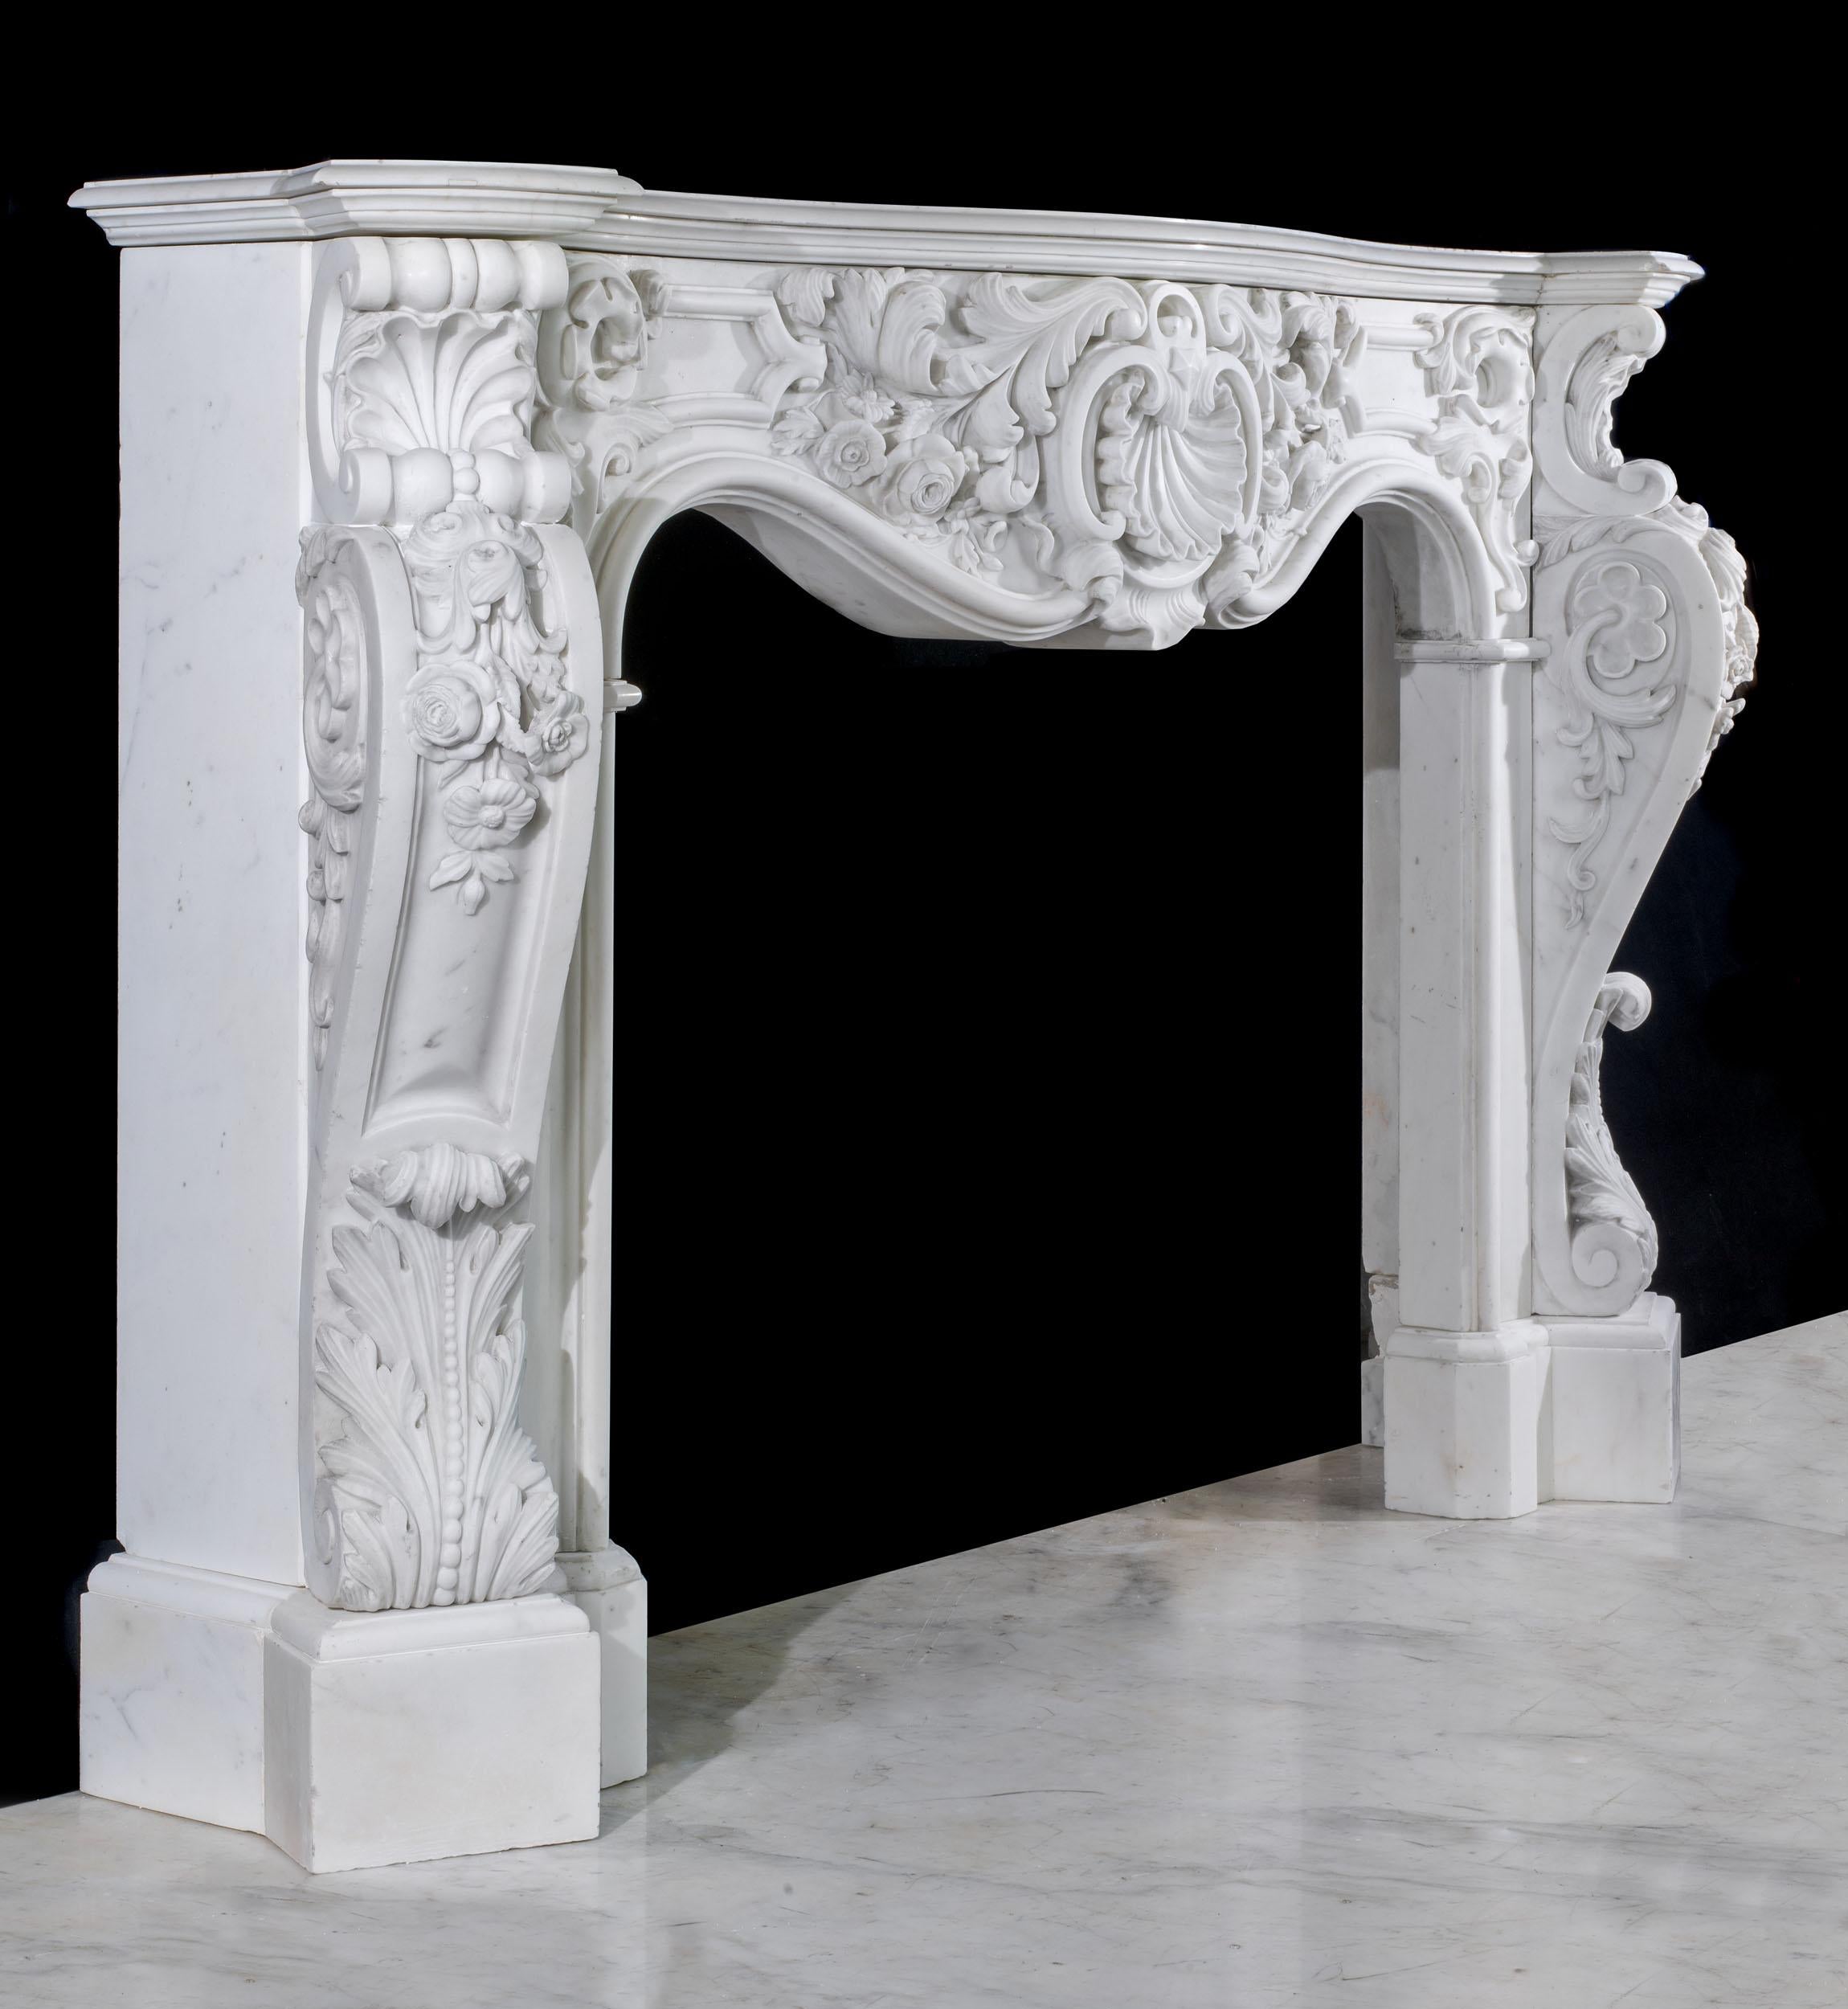 A large and grand Rococo white statuary marble fireplace, profusely carved in high relief to create a true statement piece. The moulded serpentine shelf sits an ornate frieze, carved with stylised acanthus leaves and flowers, centred by a